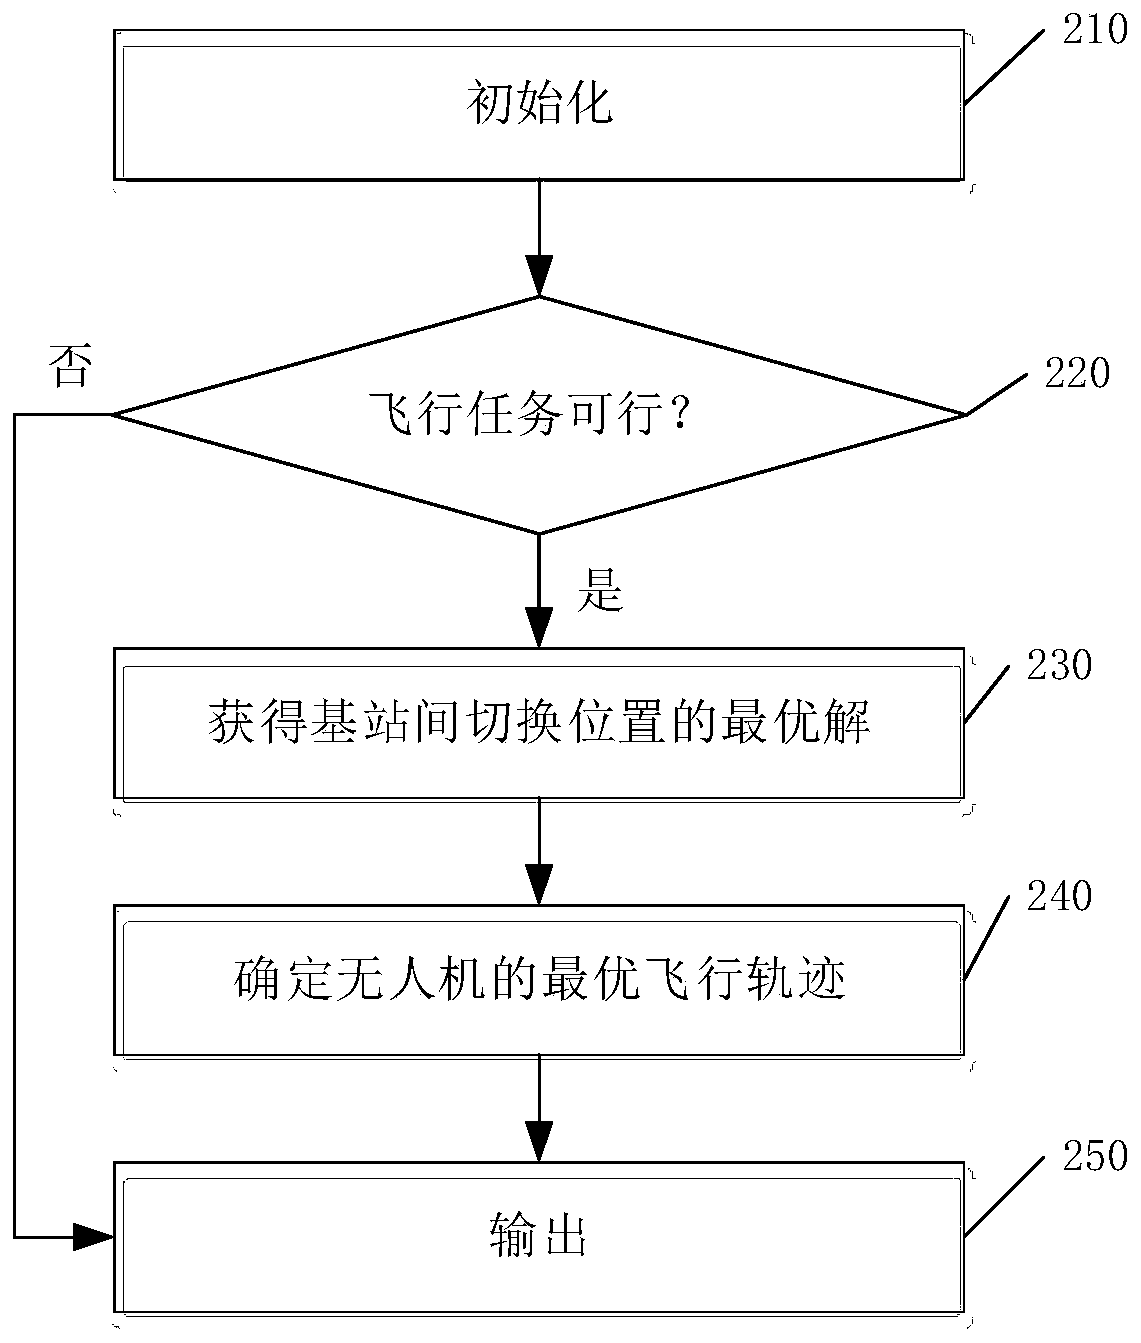 Flight track determination method and system for networked UAV (unmanned aerial vehicle)